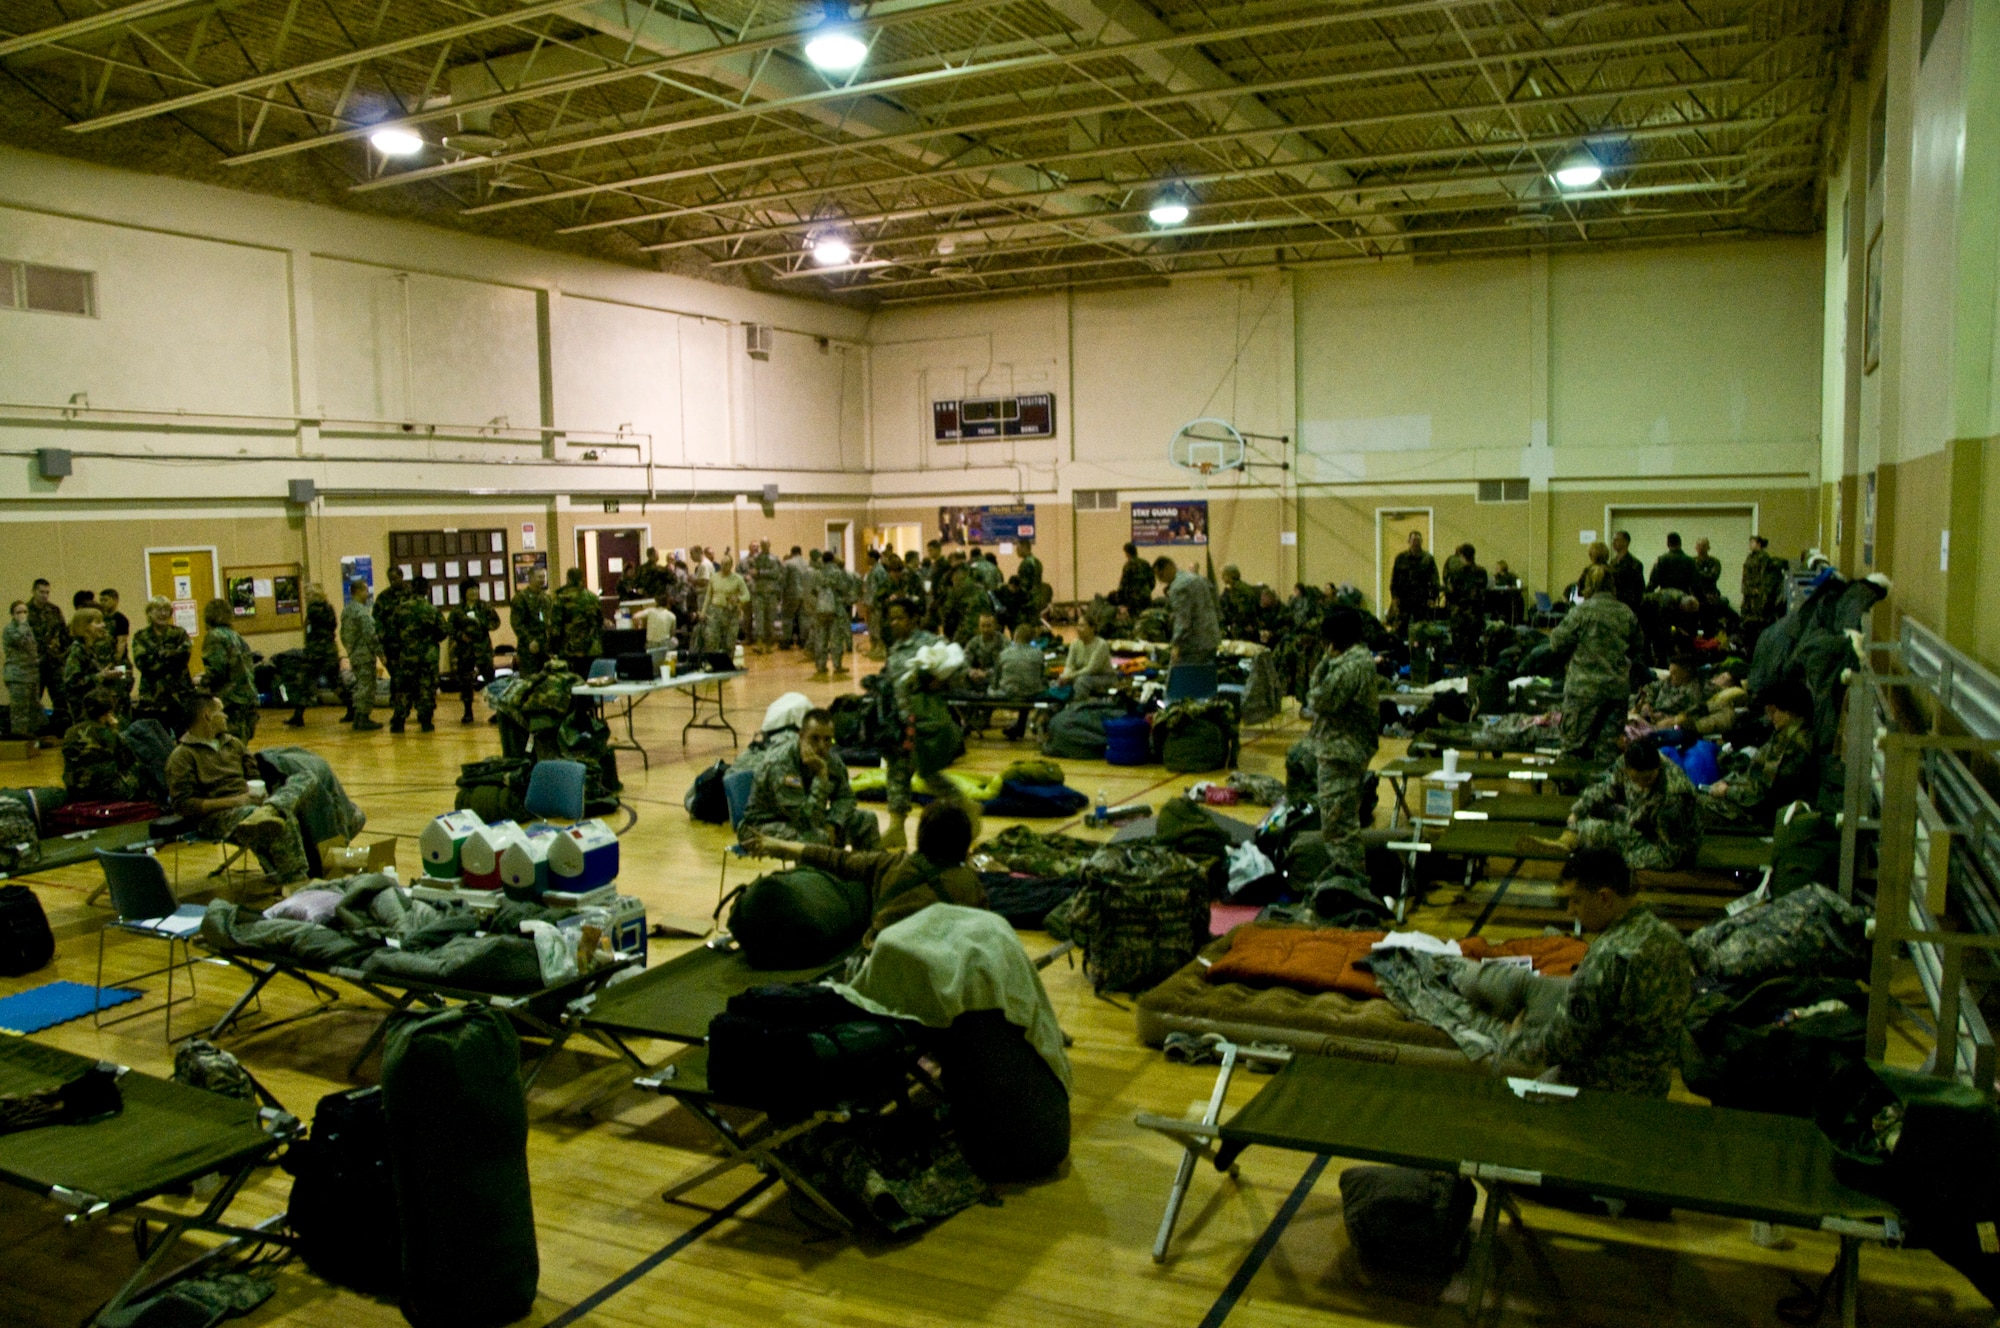 Airmen, sailors, soldiers and Marines fill the gymnasium of the Alaska Army National Guard Armory in Bethel, Alaska, in preparation to deploy in support of the 15th annual Operation Arctic Care. A joint military medical readiness exercise, Arctic Care provides no-cost health care to underserved Alaskan residents, including dental, optometry and veterinary support. This year's Navy-led mission has teams in 11 villages in Alaska's Yukon-Kuskokwim Delta region.(U.S. Air Force photo by Senior Airman Christopher Griffin)(RELEASED)